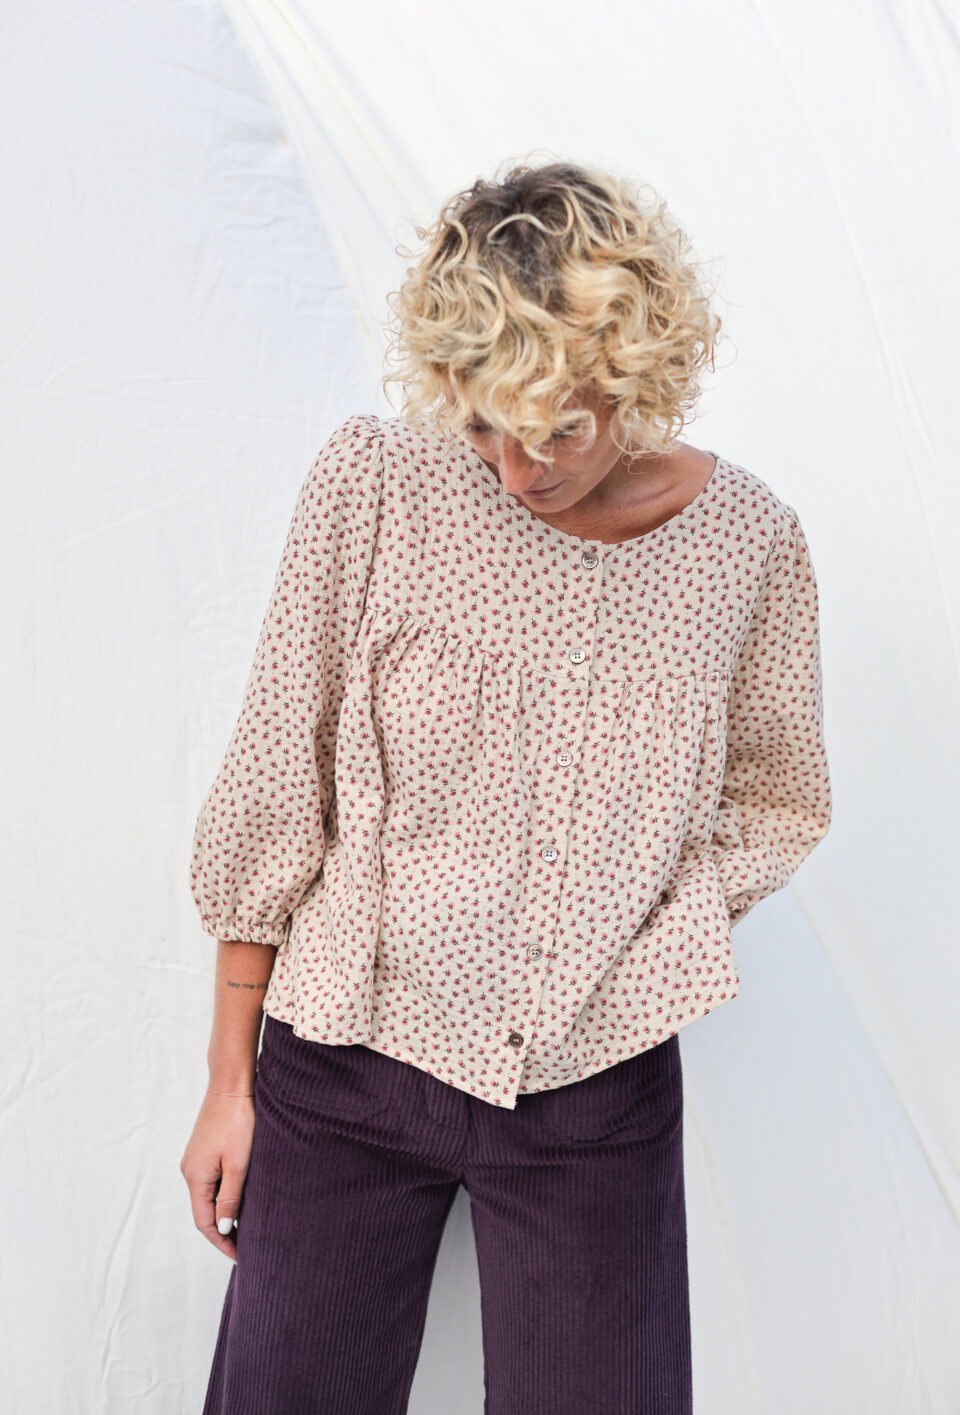 Puff sleeve blouse in double gauze floral cotton | Top | Sustainable clothing | OffOn clothing